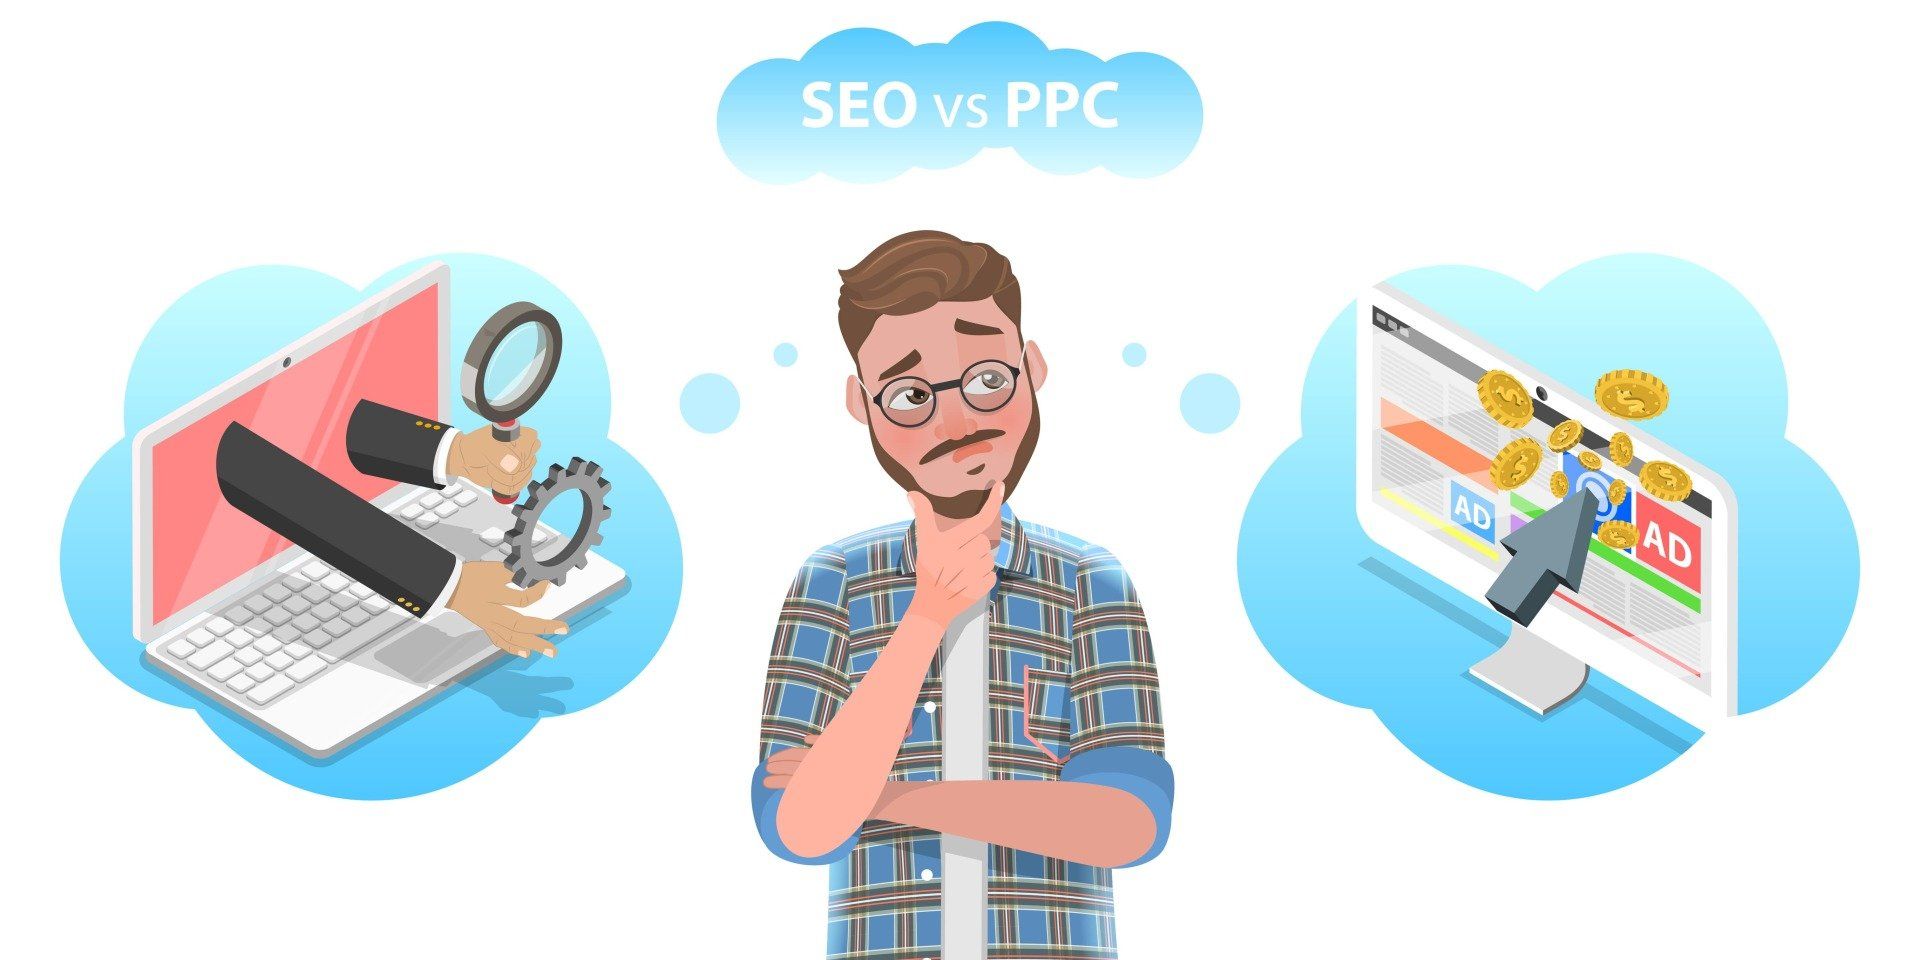 Search Engine Optimization (SEO) or Paid Search (PPC)